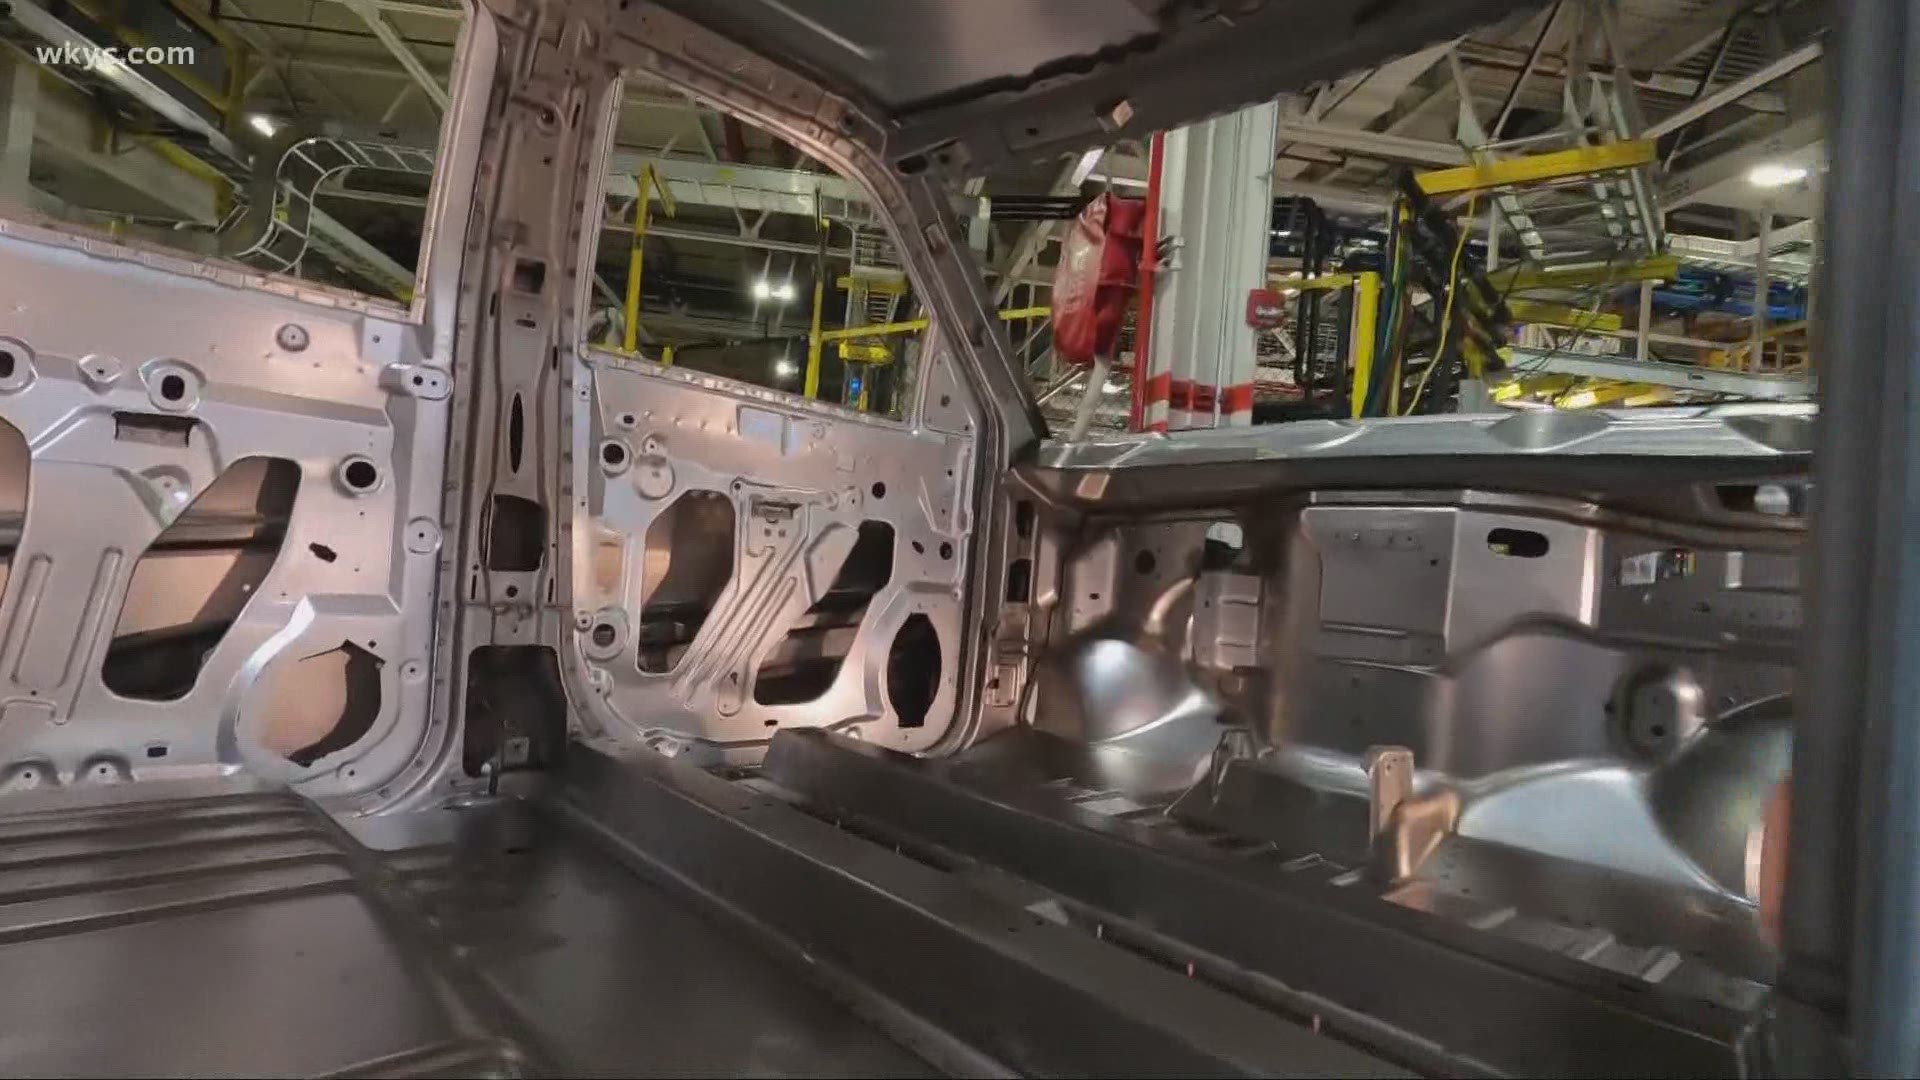 Lordstown Motors is still months away from producing trucks. 3News' Mark Naymik reports.